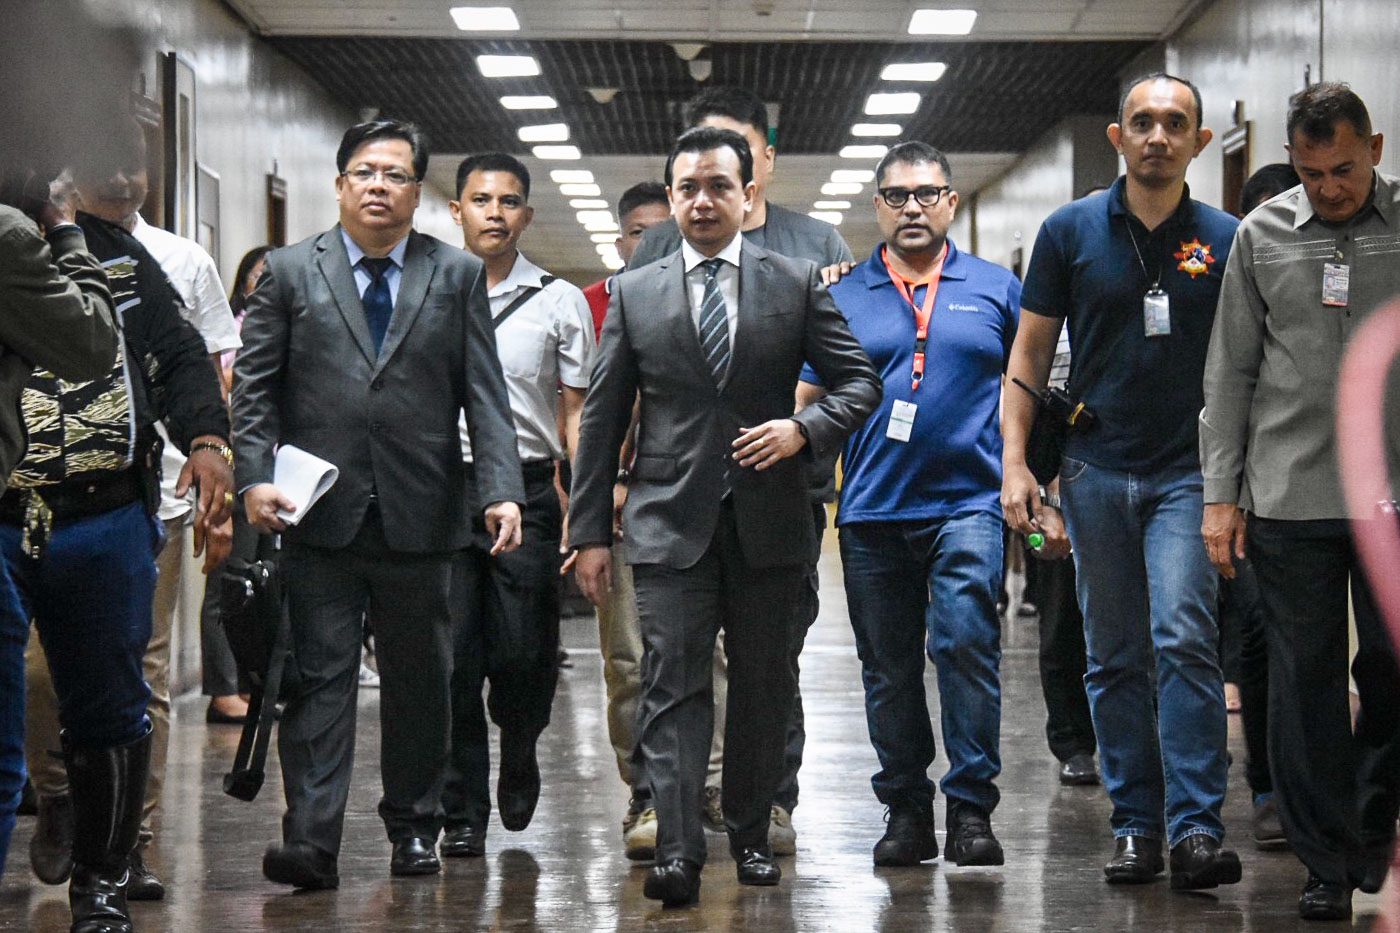 Trillanes to remain in the Senate after posting bail